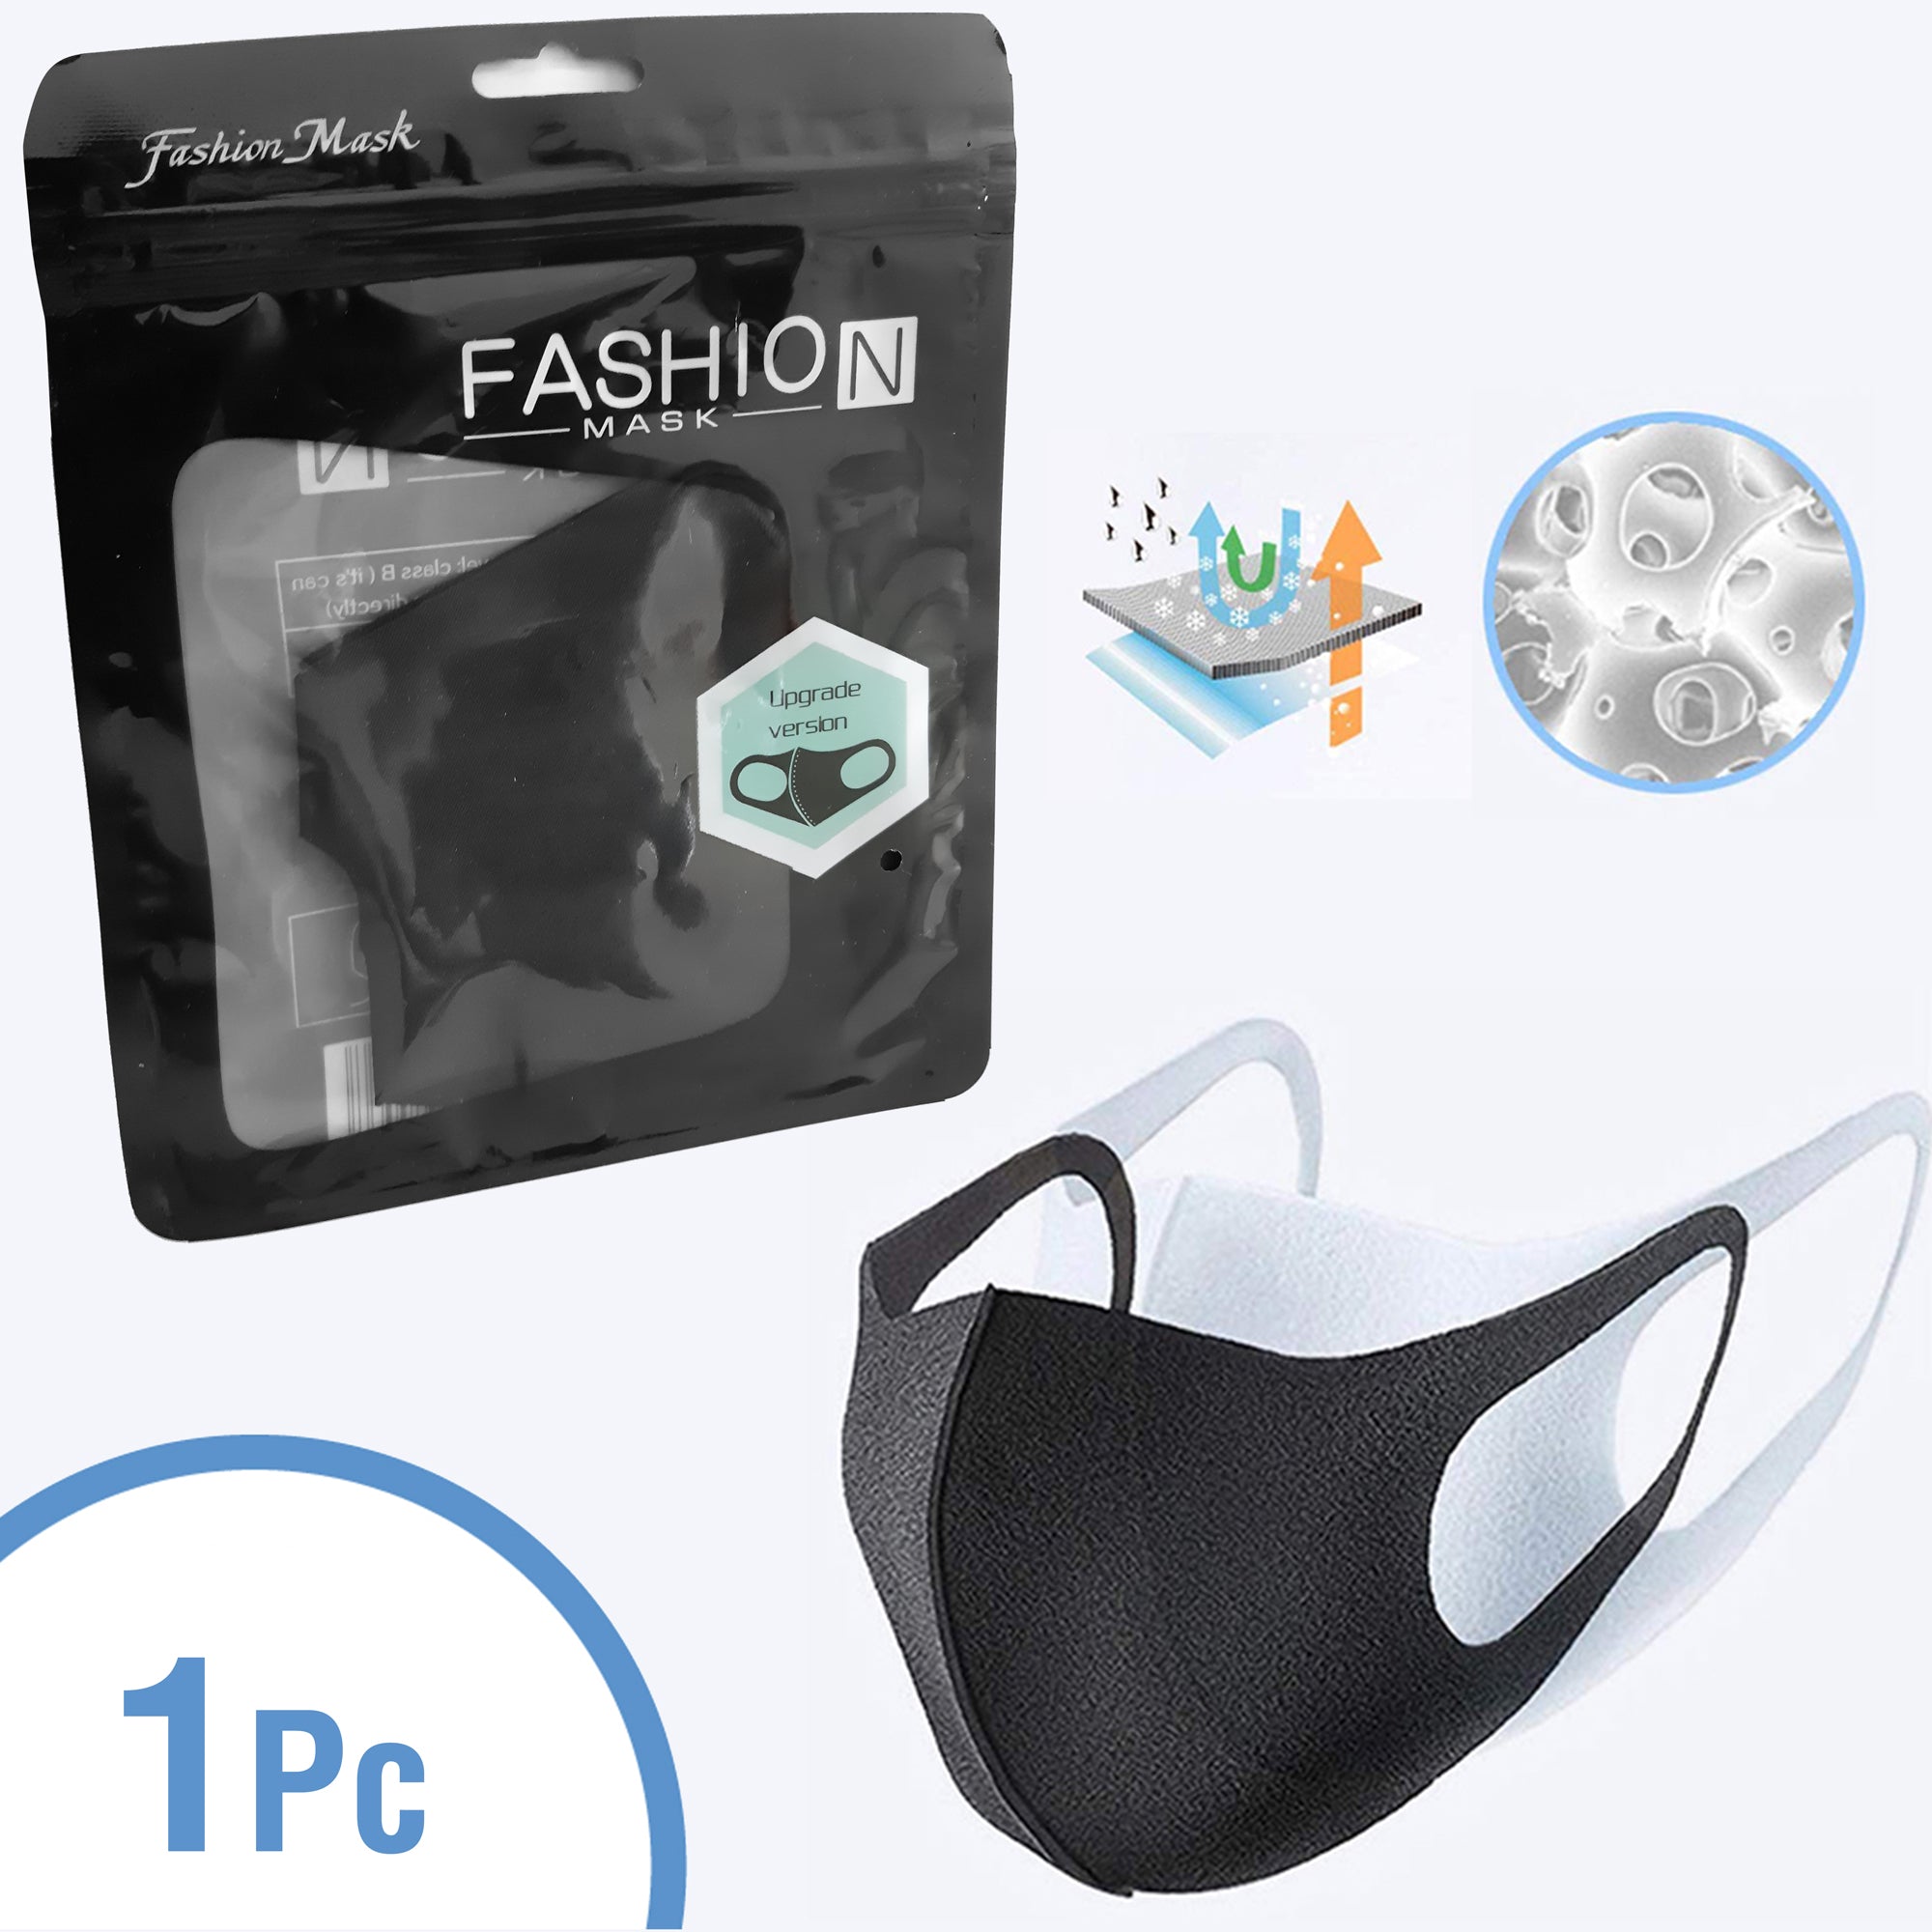 1 PC Fashion Mask, and Washable (FZ/T73049-2014 Certified) – ADD Printing